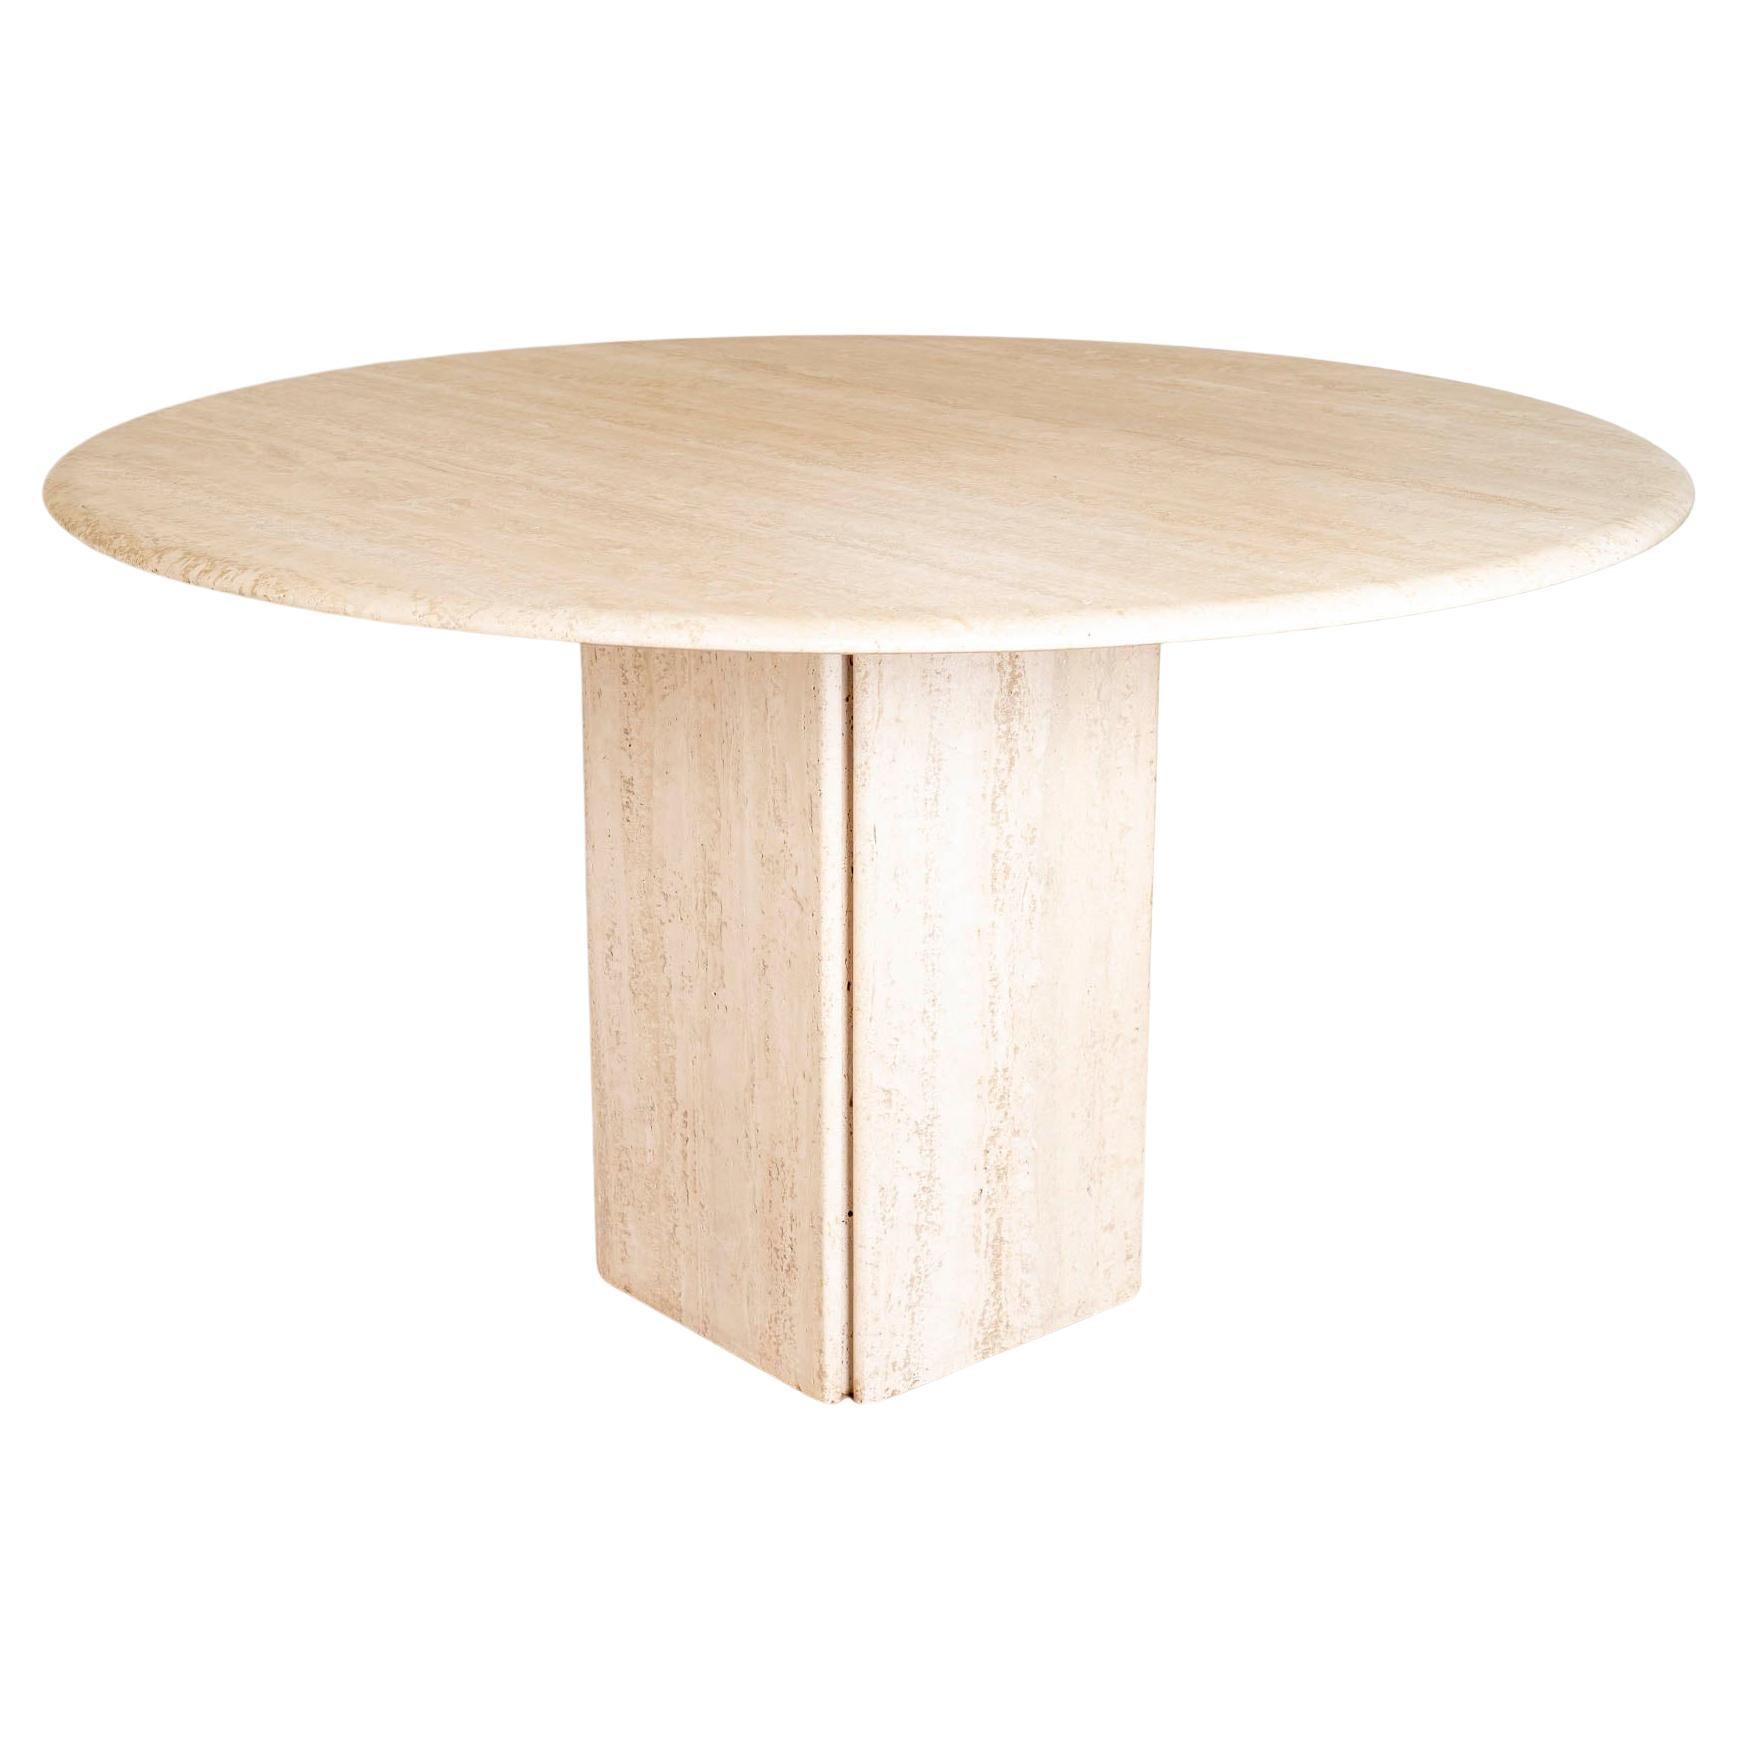 1970 Round Table in Travertine Model Dolmen from Roche Bobois For Sale